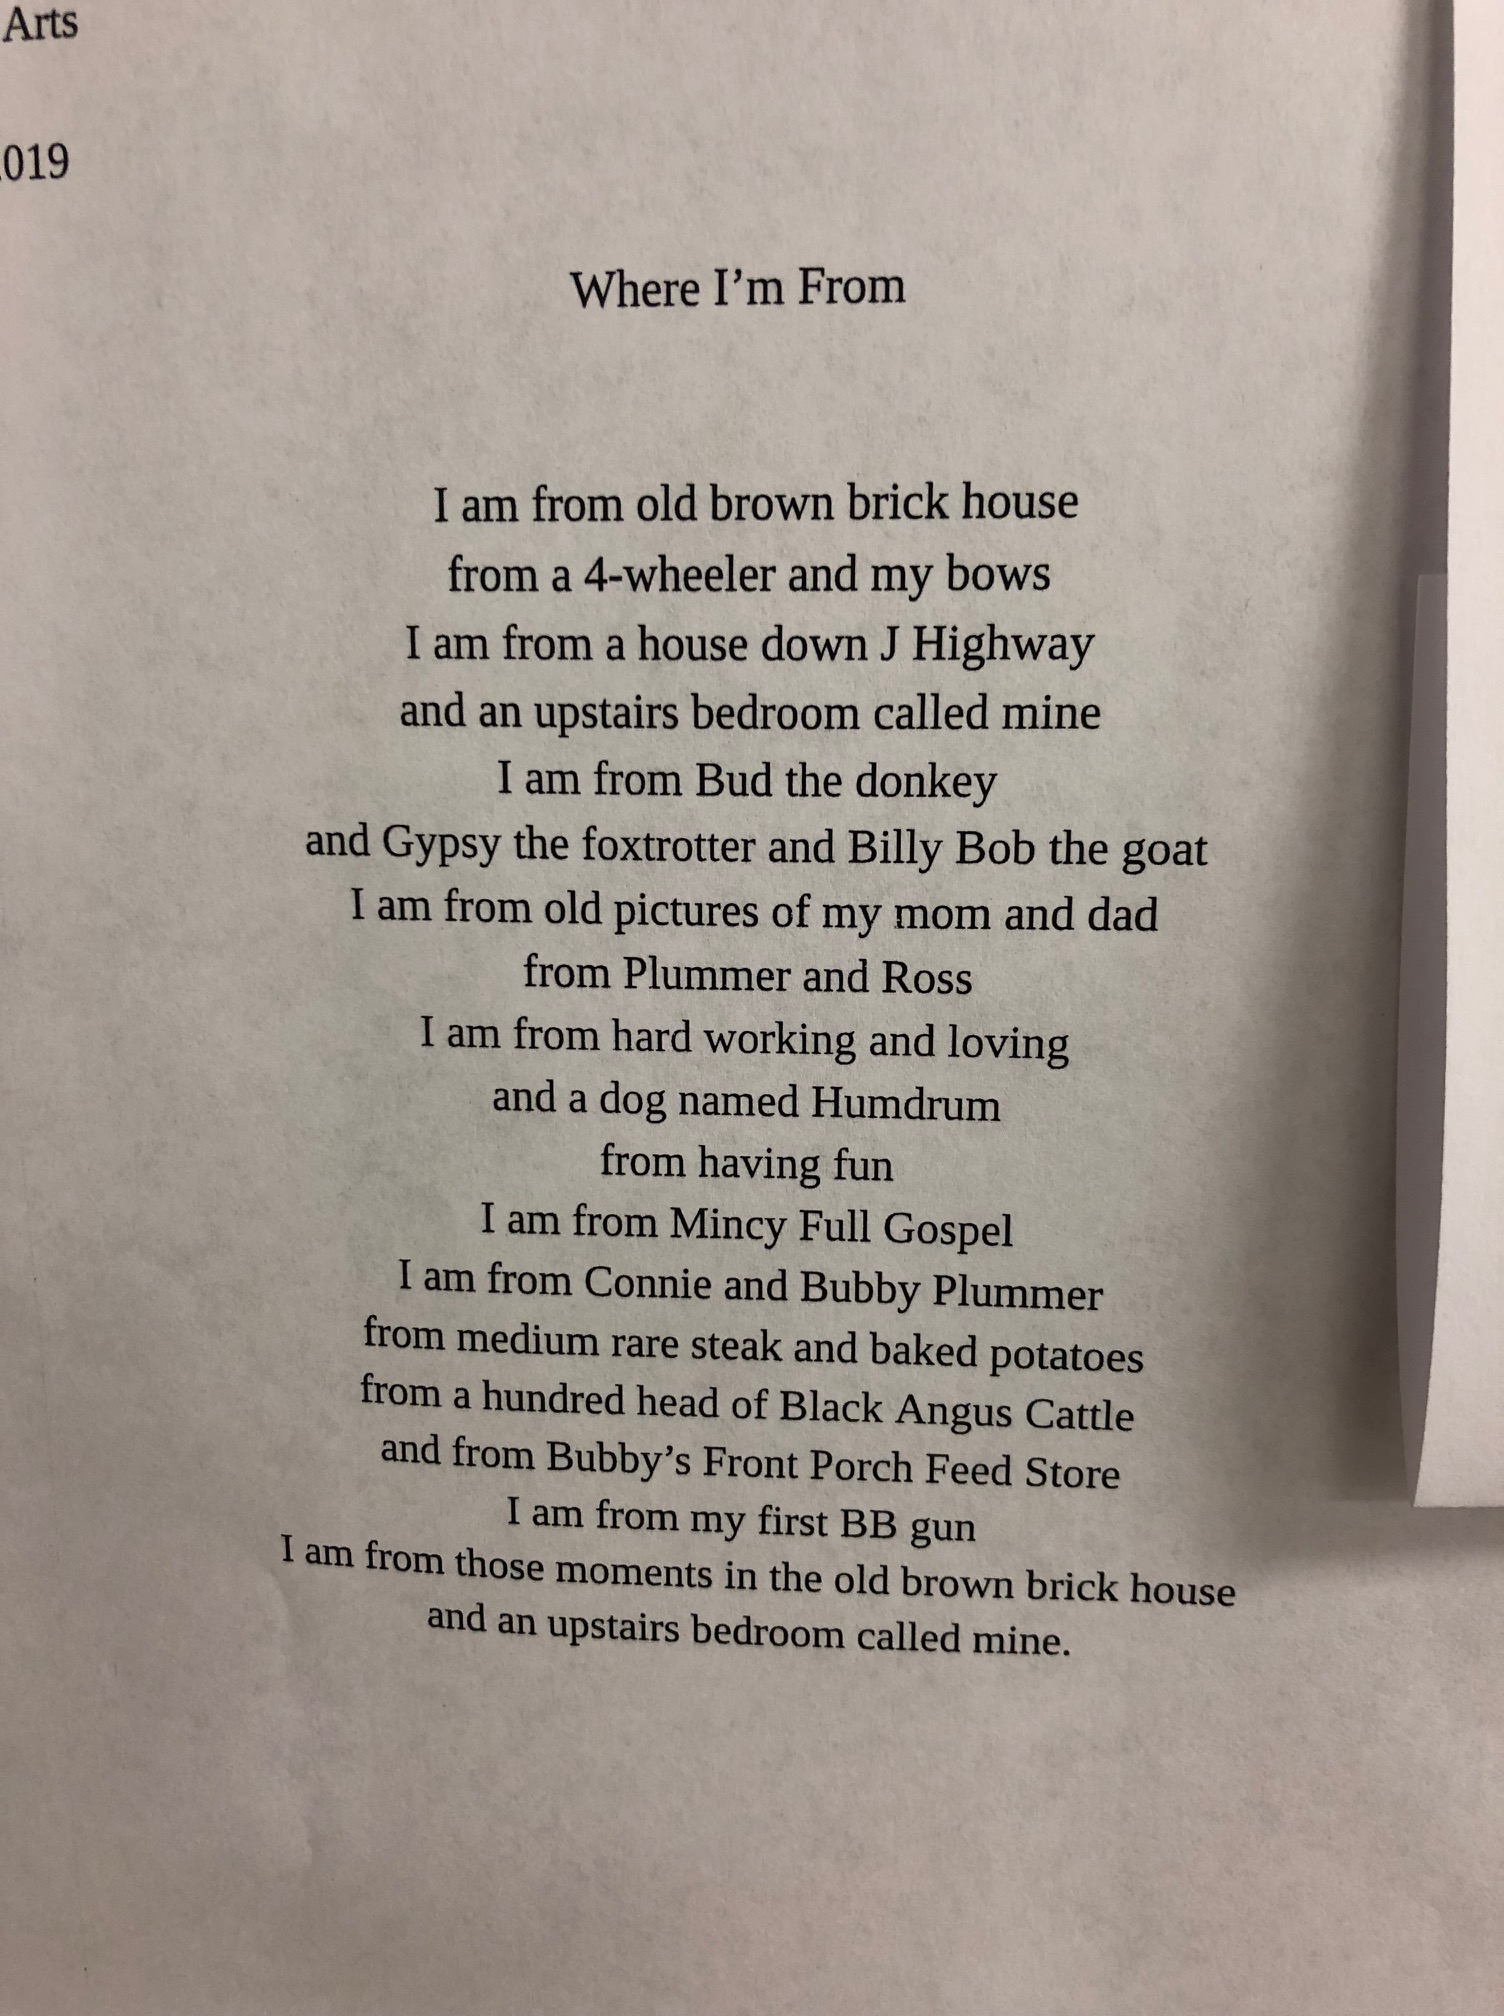 A "Where I'm From" poem written by a middle school student